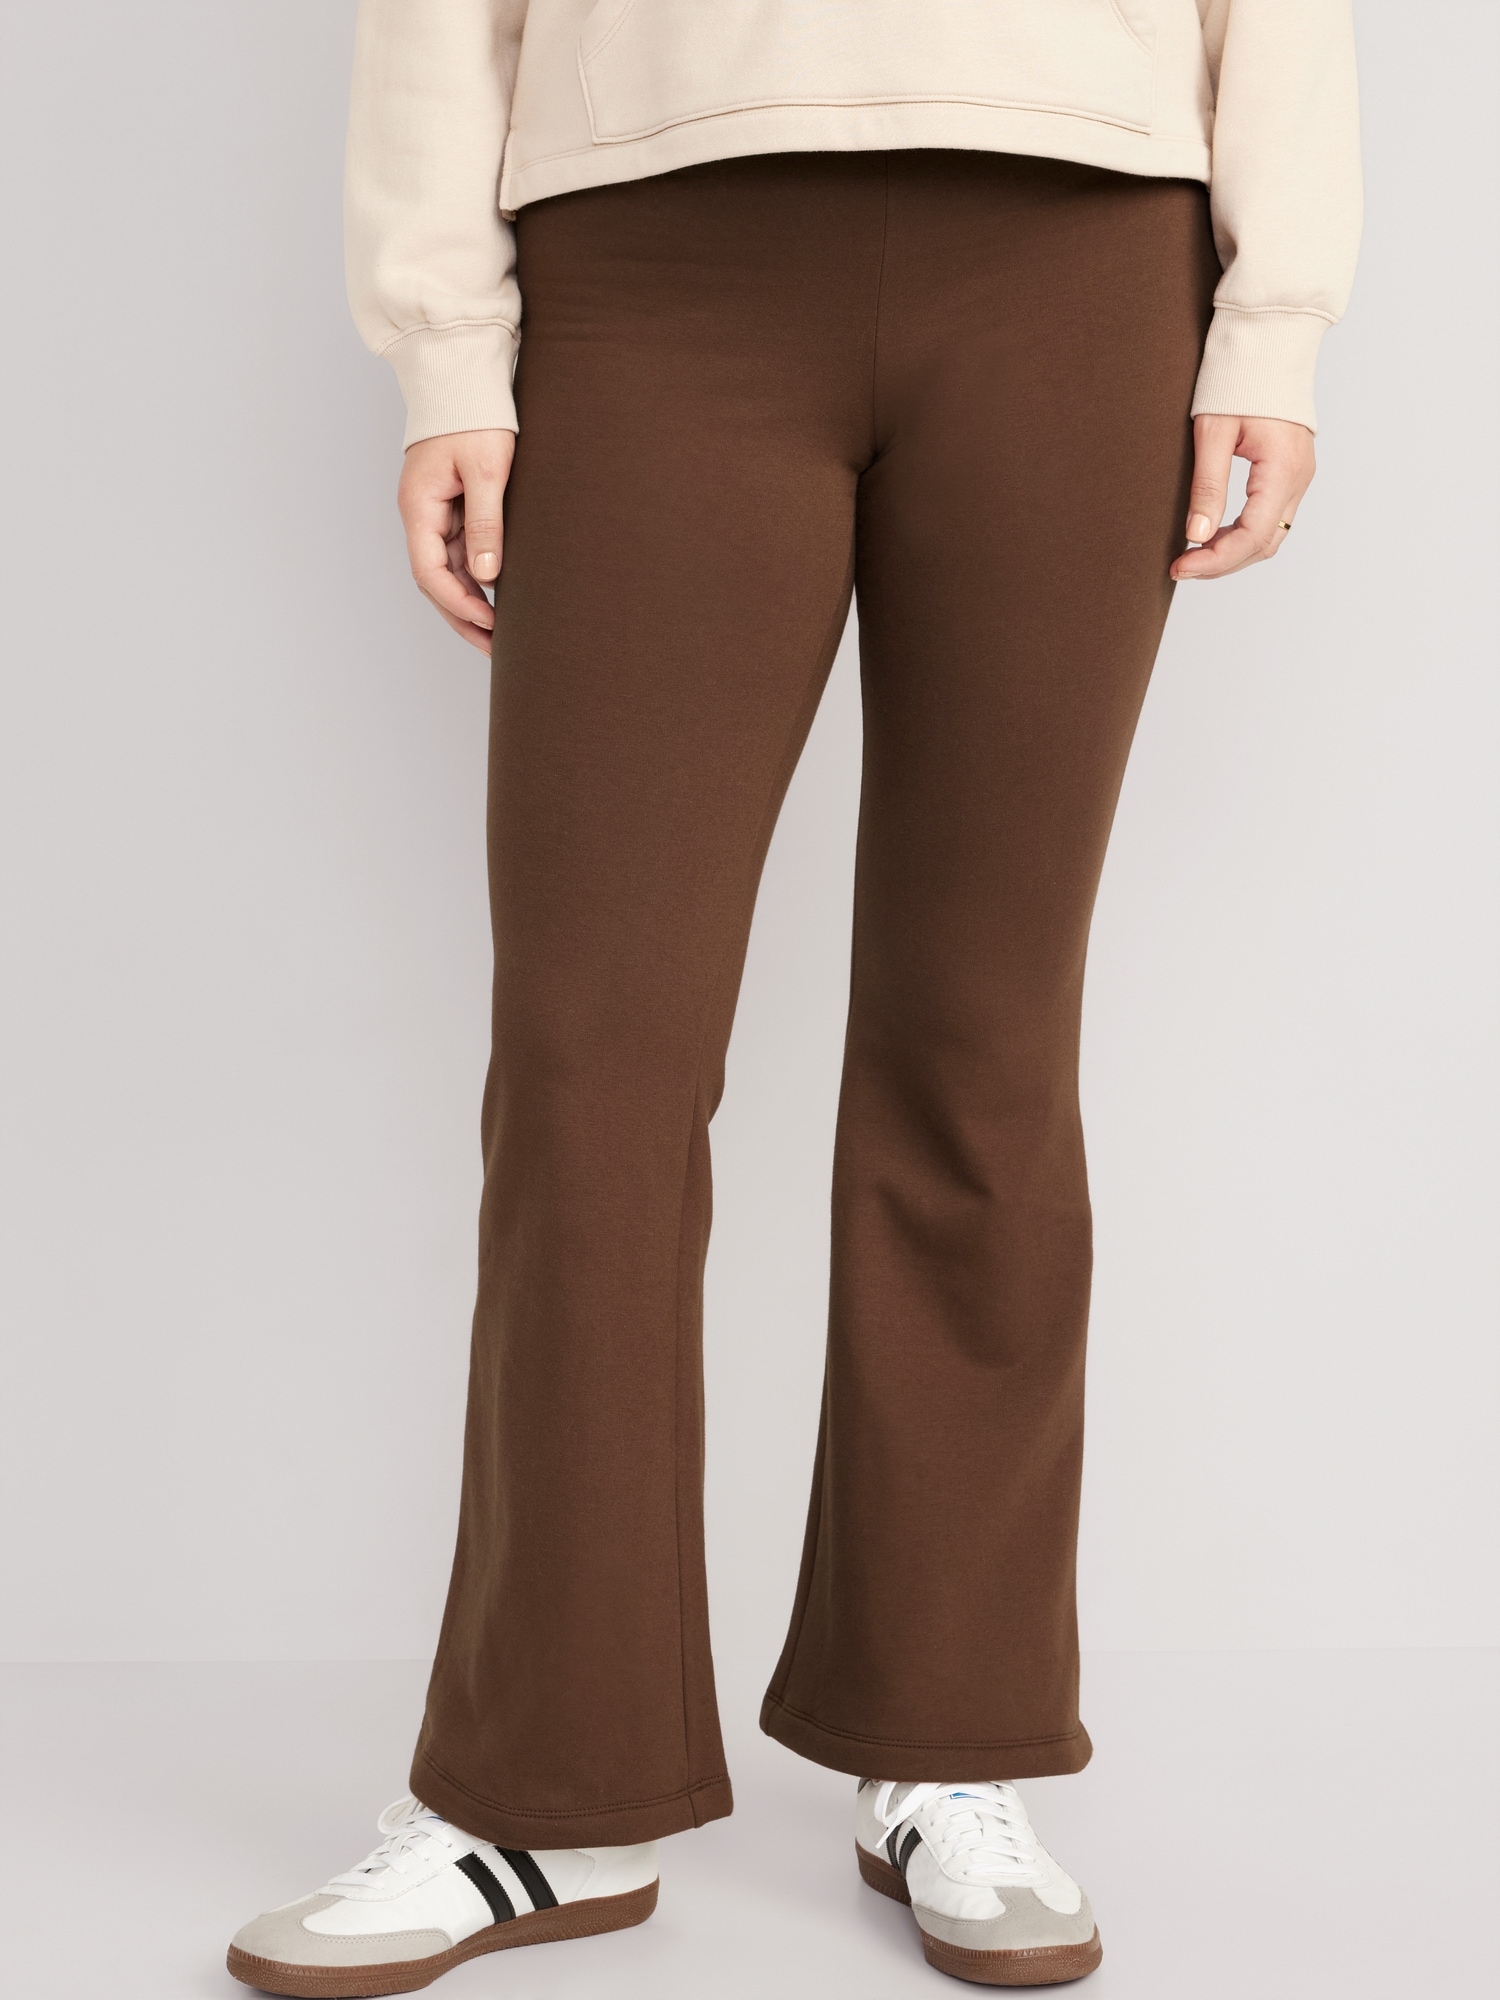 Womens Thick Fleece Guard Capris Versatile Straight & Warm Ankle Length Fleece  Lined Trousers Womens For Casual & Party Wear Style #230627 From Landong03,  $28.53 | DHgate.Com